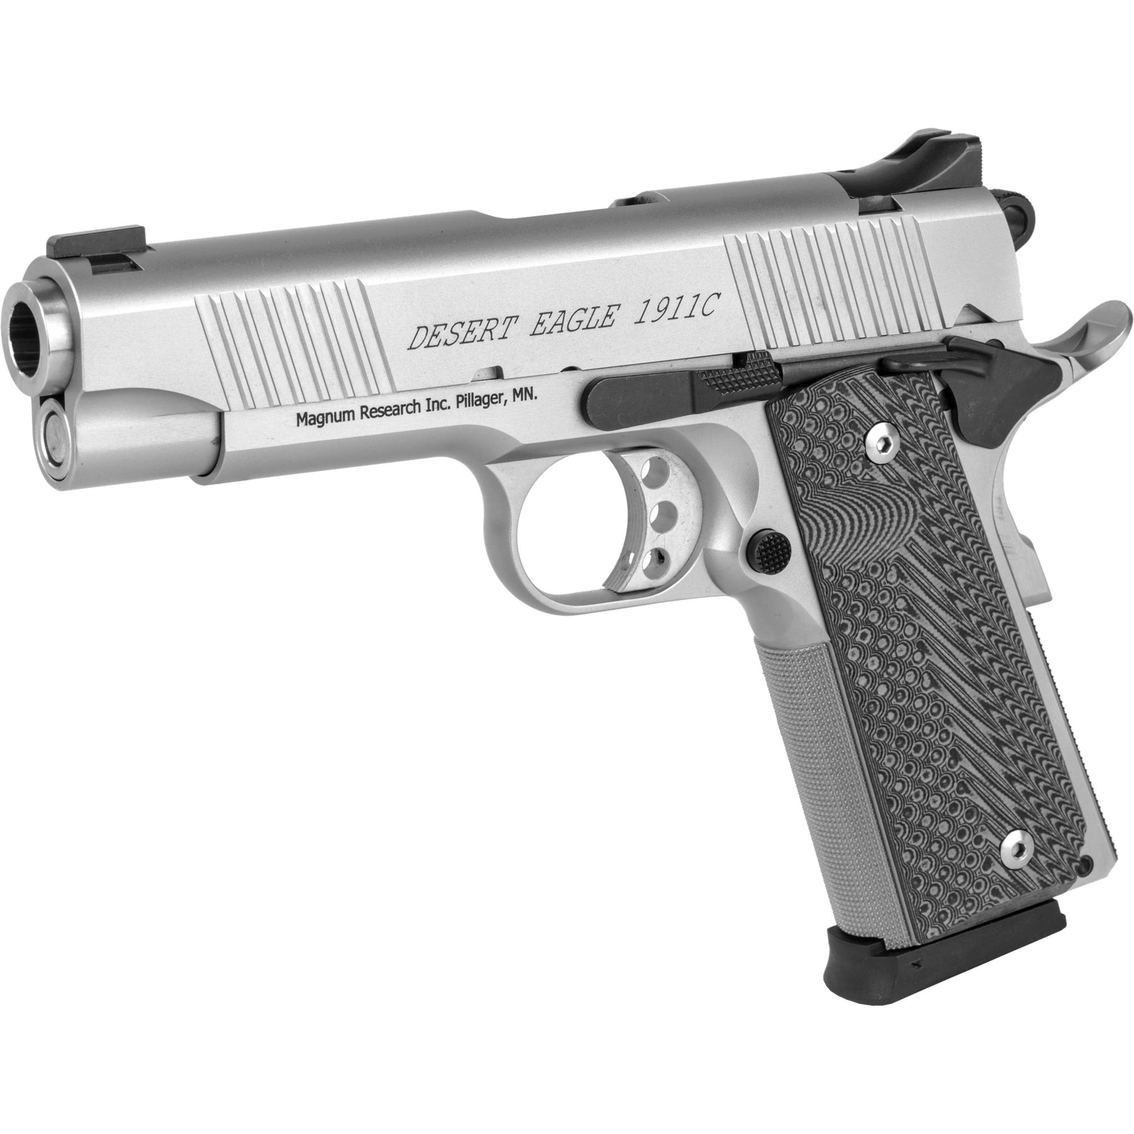 Magnum Research 1911c 45 Acp 4.33 In. Barrel 8 Rds 2-mags Pistol Black | Handguns | Sports & Outdoors | Shop The Exchange